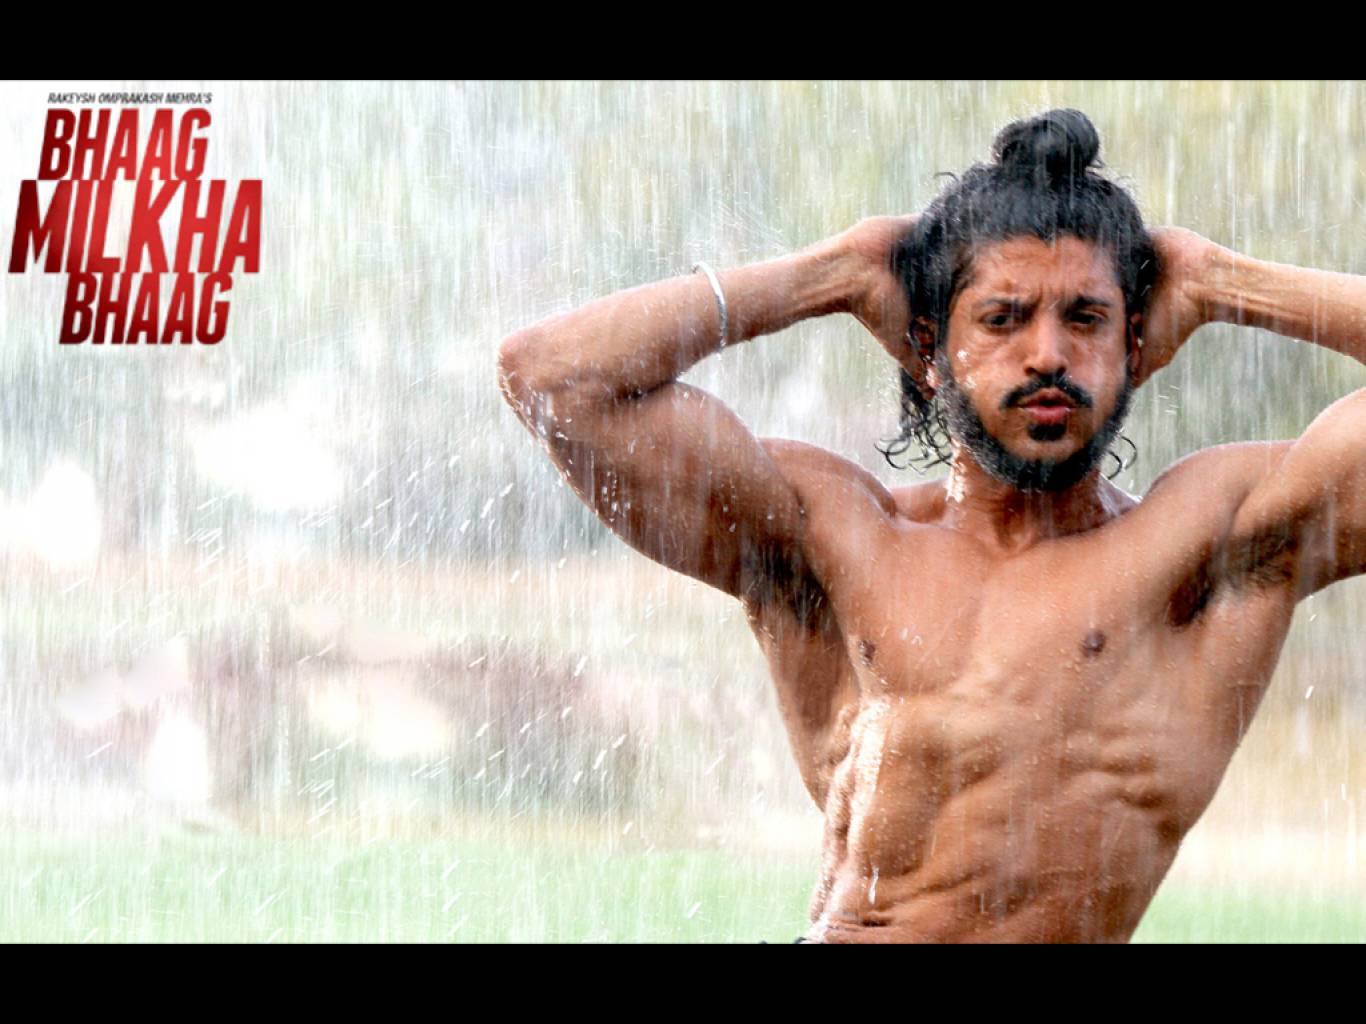 Revisiting Bhaag Milkha Bhaag - the first Bollywood sports biopic on a  